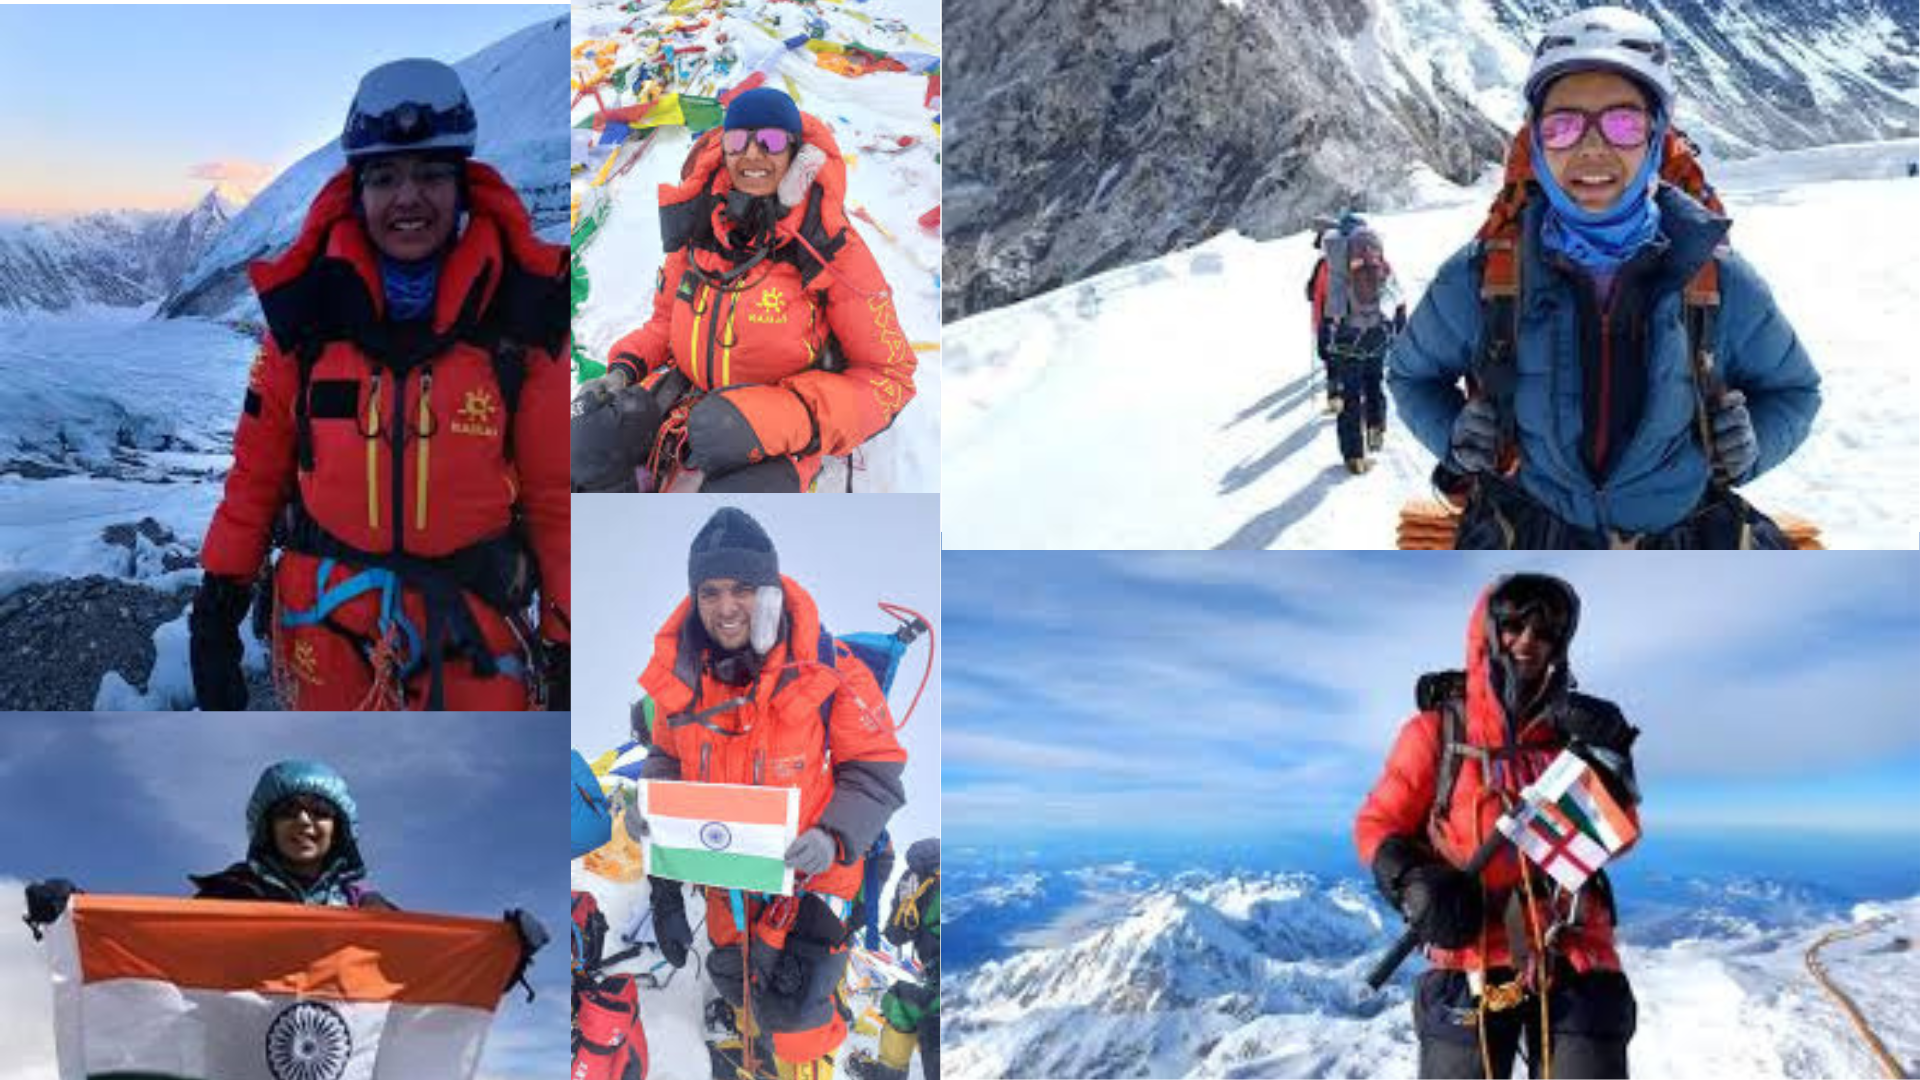 Mount Everest Conquerors: Kamya and Her Father—Unstoppable or Just Beginning?